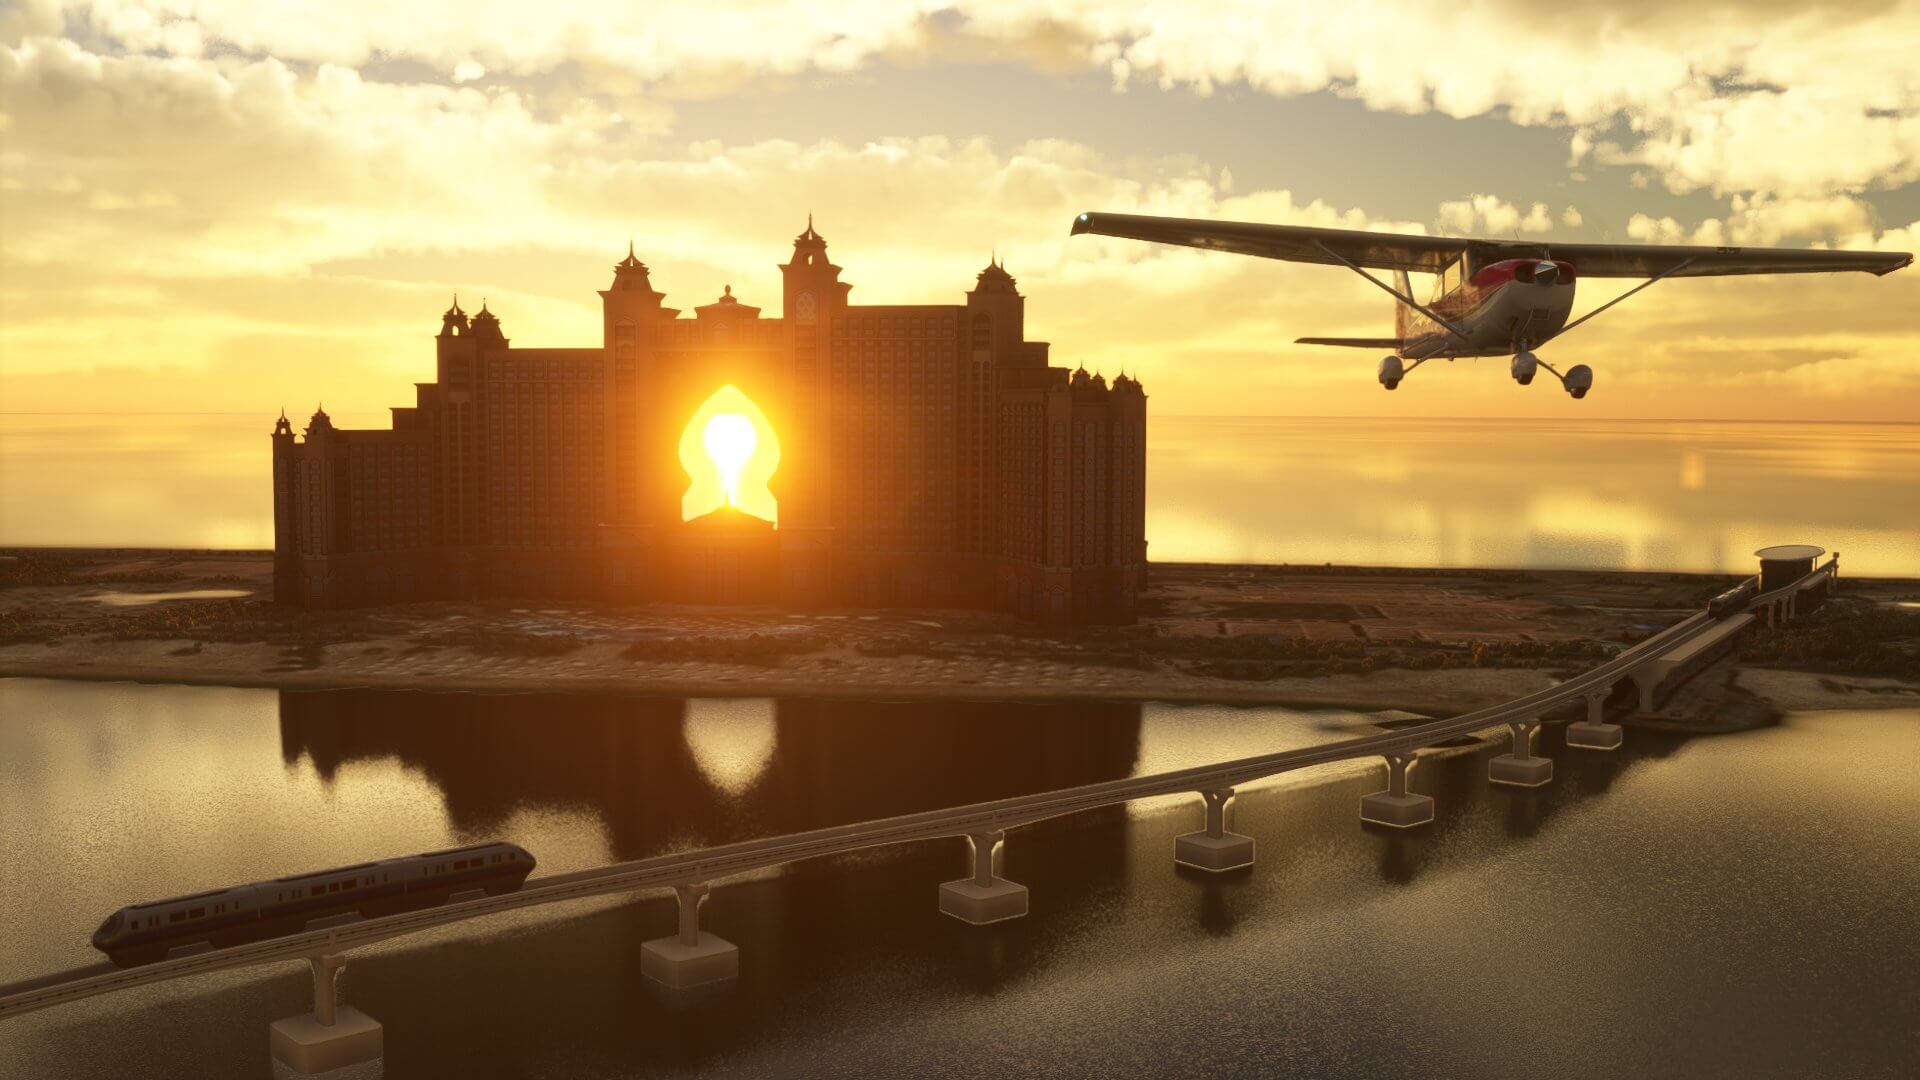 The Cessna 172 flies over a bridge, with the sun visible through a hotel behind.